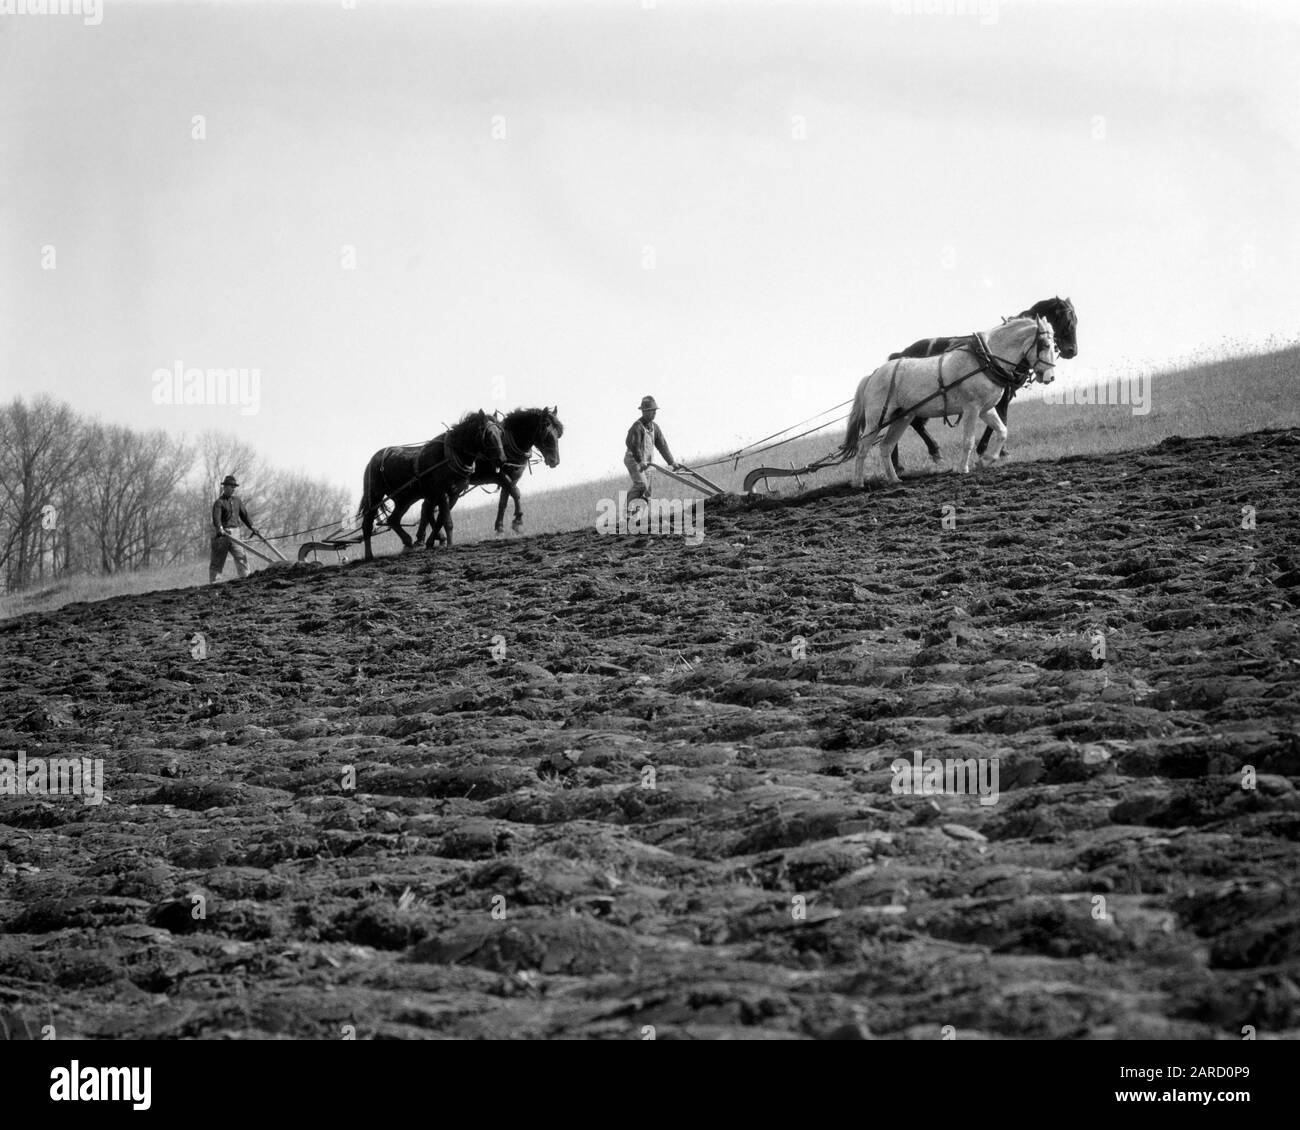 1920s 1930s 1940s TWO ANONYMOUS SILHOUETTED FARMERS EACH BEHIND A TWO HORSE TEAM PLOWING A FIELD TO PREPARE FOR SPRING PLANTING - f209 HAR001 HARS COPY SPACE FULL-LENGTH PERSONS SCENIC FARMING MALES SPIRITUALITY MIDDLE-AGED AGRICULTURE B&W MIDDLE-AGED MAN WIDE ANGLE CLOUDS SKILL OCCUPATION SKILLS MAMMALS PREPARE STRENGTH STRATEGY PLOW SILHOUETTED FARMERS POWERFUL PROGRESS LABOR PLOWING PRIDE TO OCCUPATIONS CONCEPTUAL ANONYMOUS GROWTH LAND MAMMAL MID-ADULT MID-ADULT MAN PLOUGH PRECISION SPRINGTIME TEAMS TOGETHERNESS BLACK AND WHITE CUMULUS HAR001 LABORING OLD FASHIONED Stock Photo